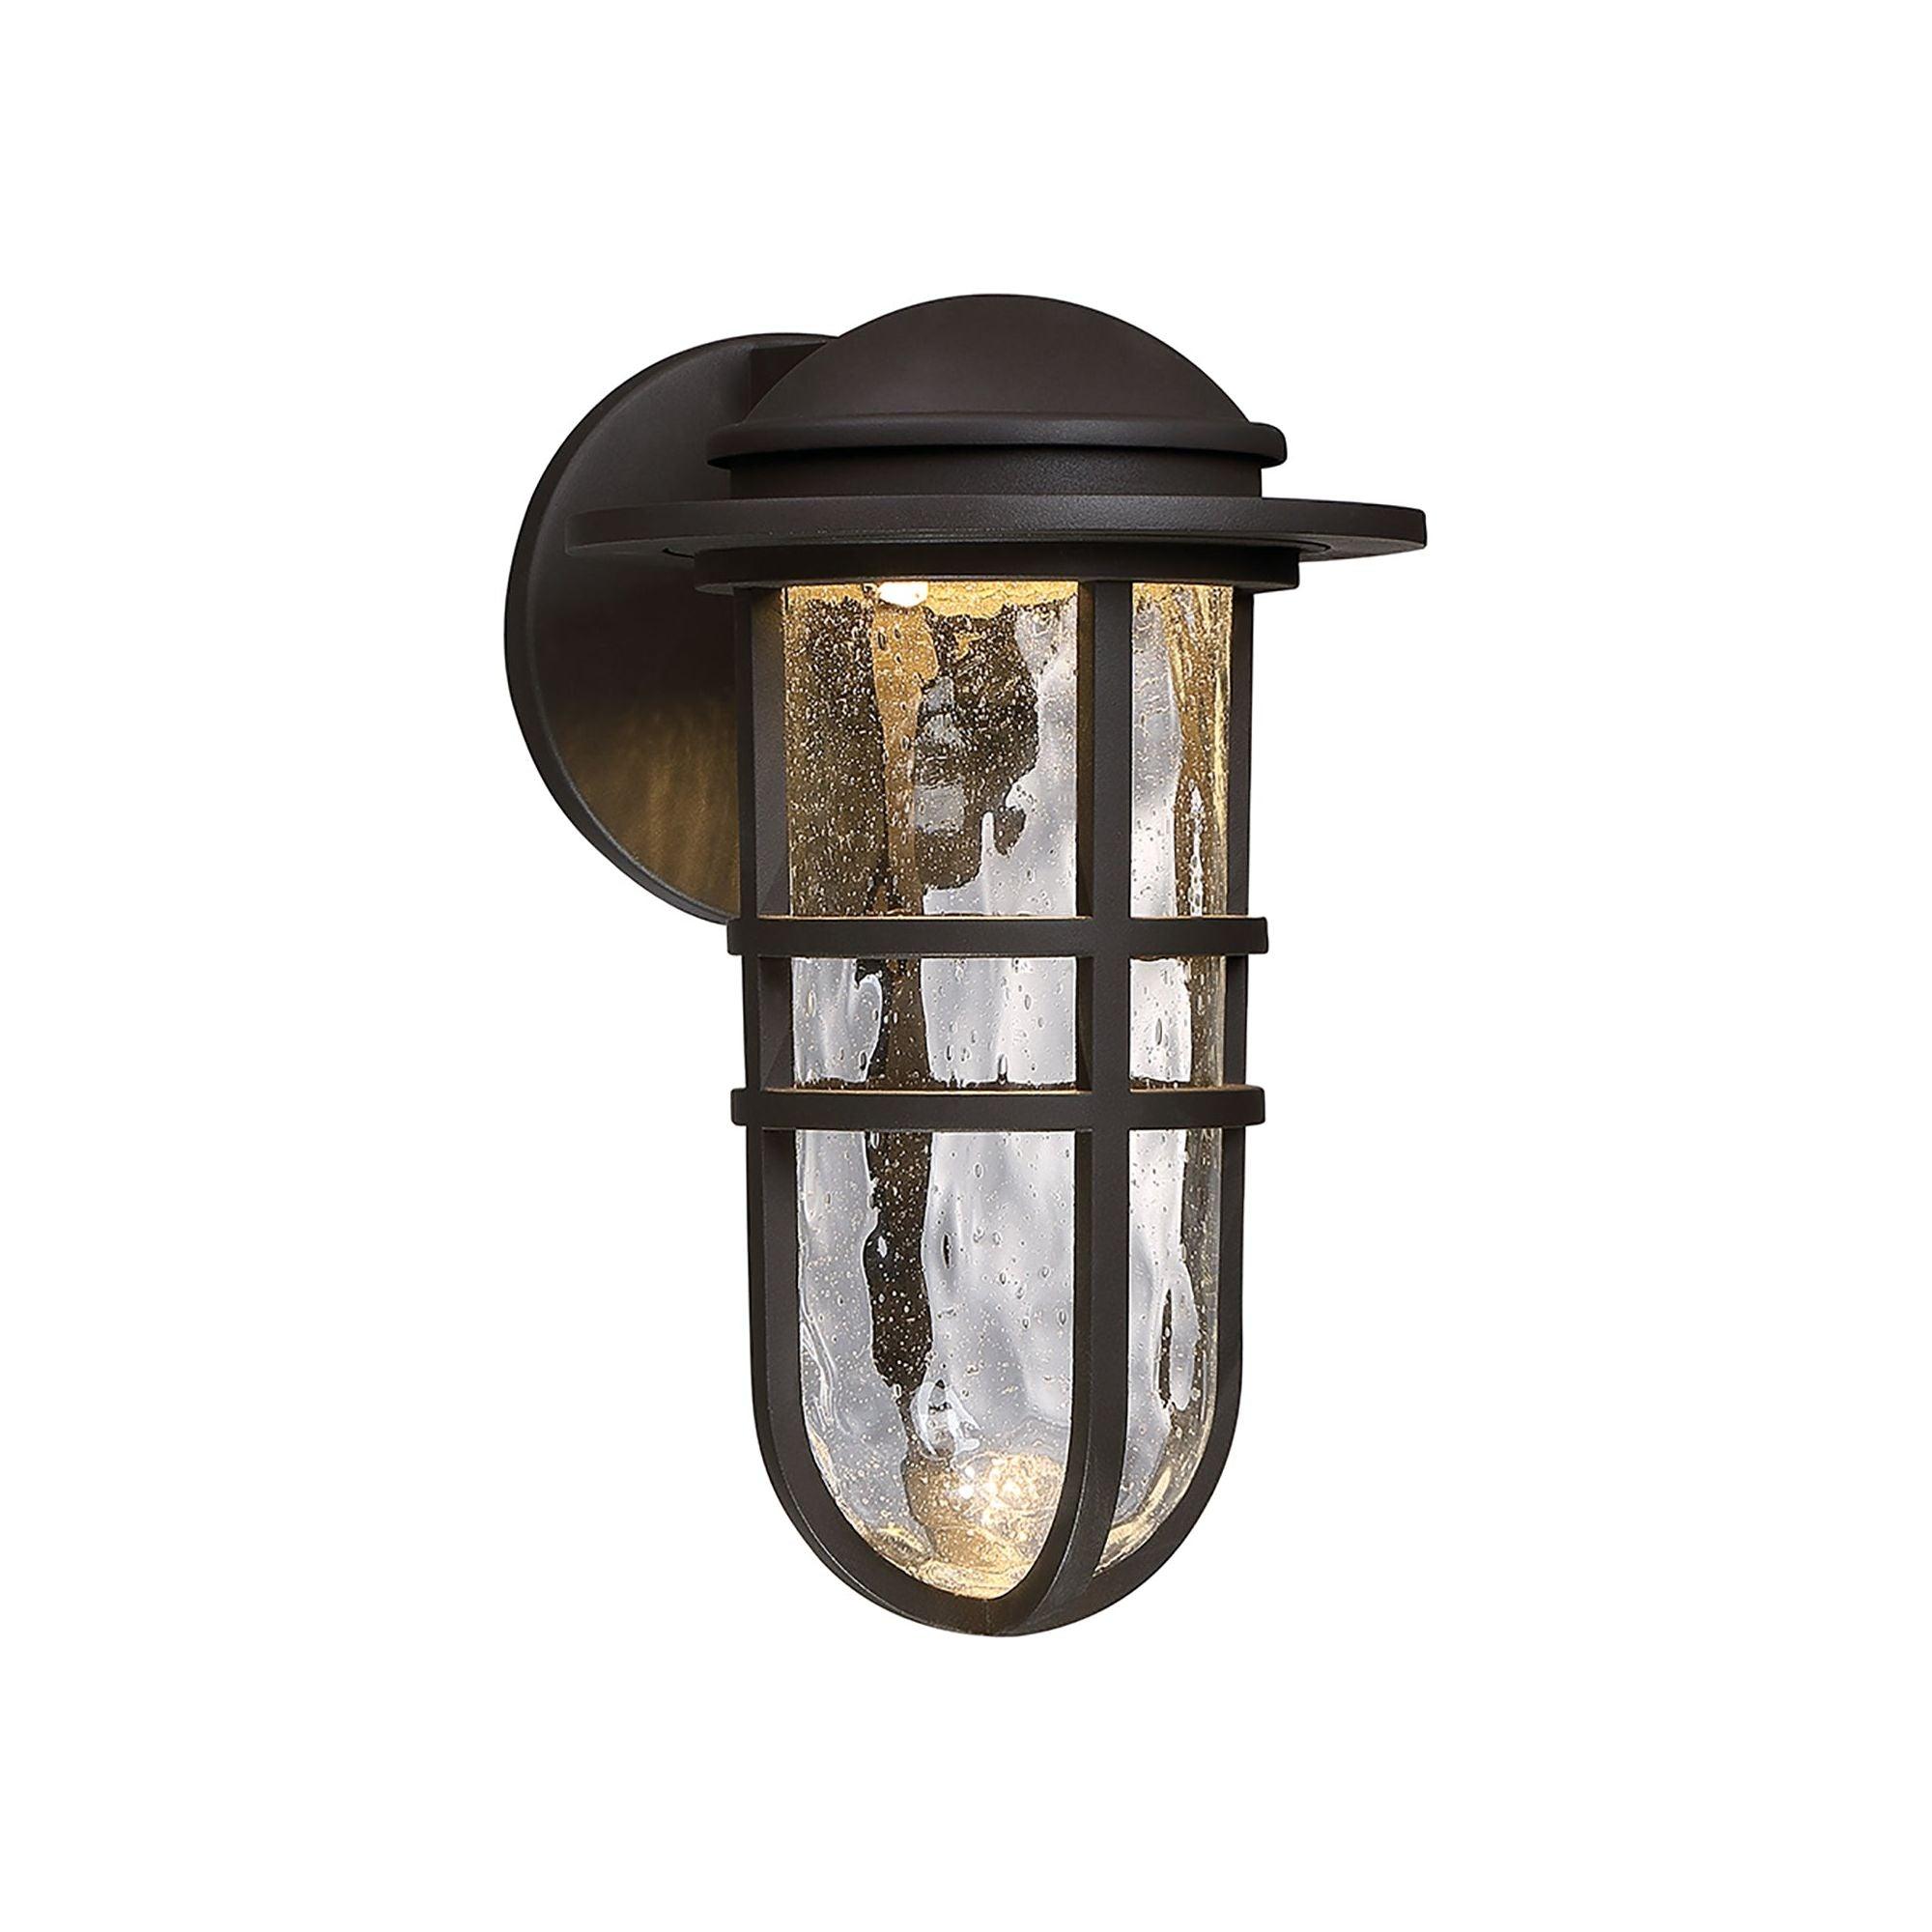 dweLED - Steampunk 12.8" LED Indoor/Outdoor Wall Light - Lights Canada